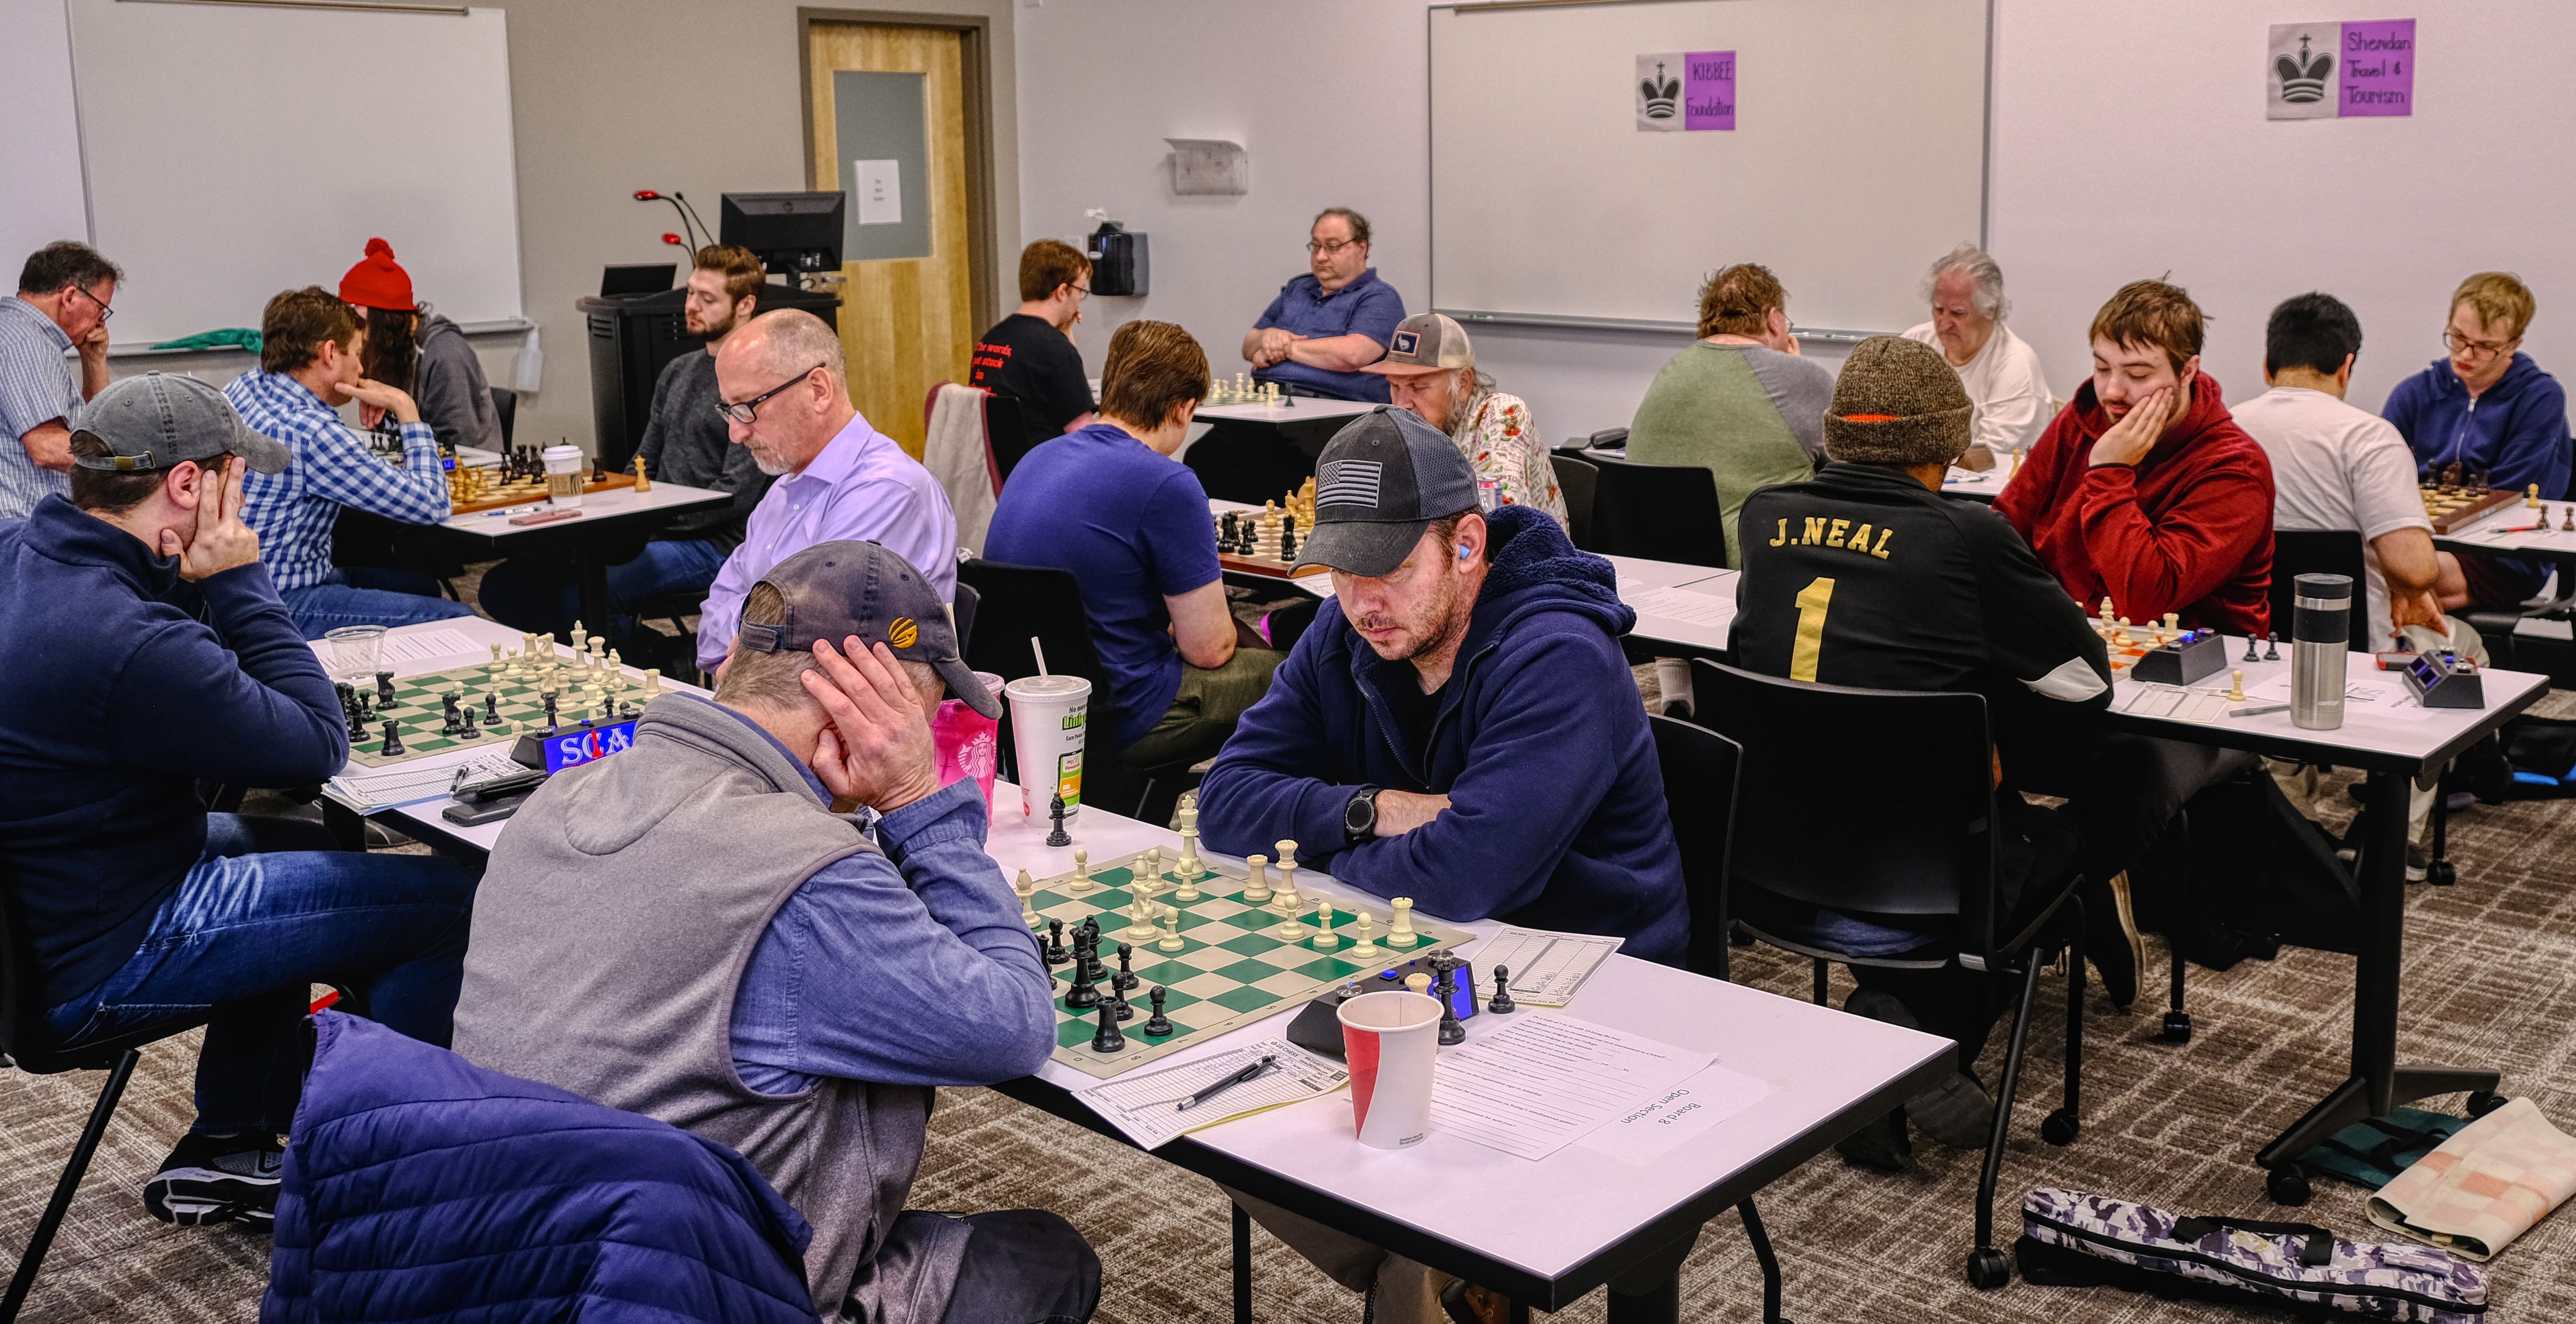 CIS Students Play in the Spring Charity Chess Challenge Hosted by Chess24